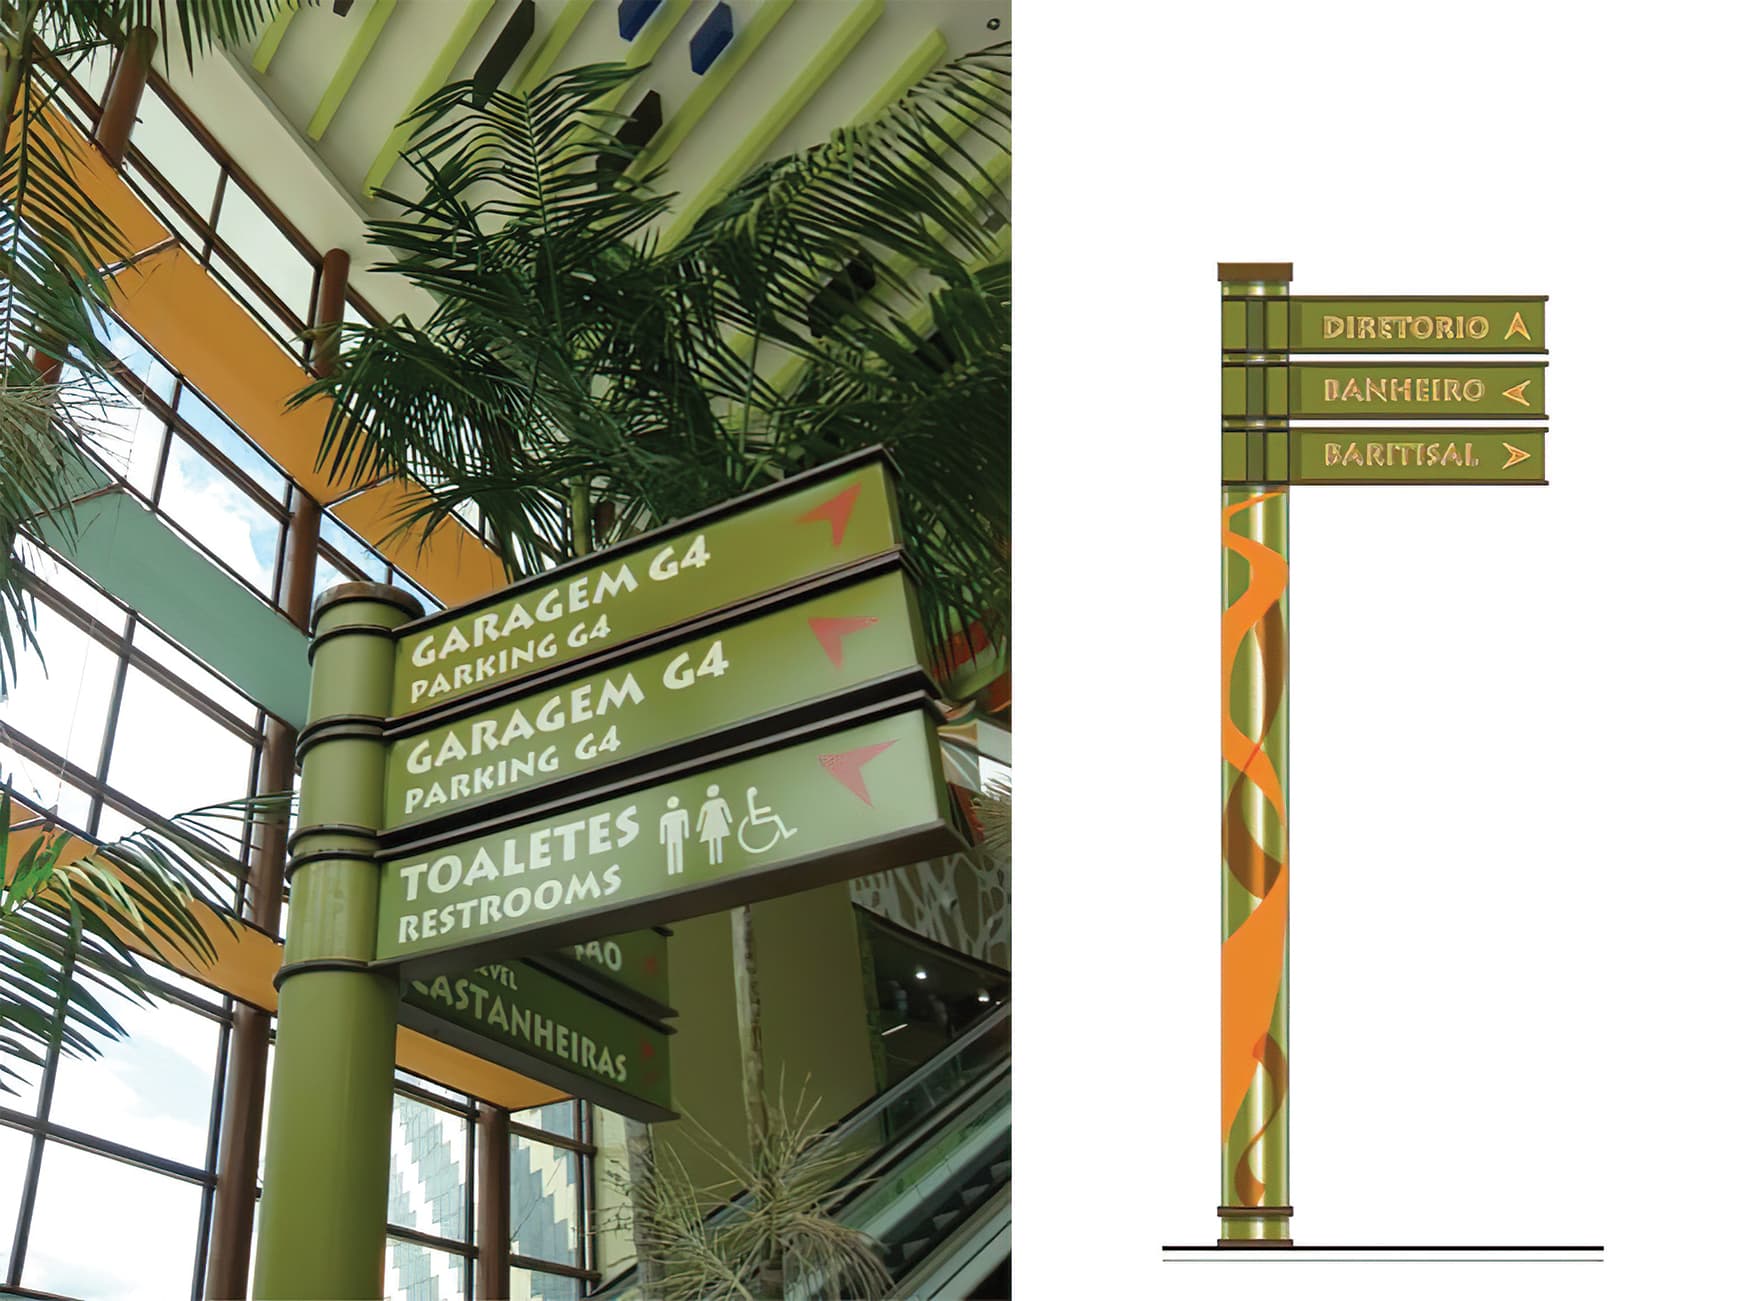 Manauara Shopping, a retail destination project located in Brazil. Directional Signage. Wayfinding Design.